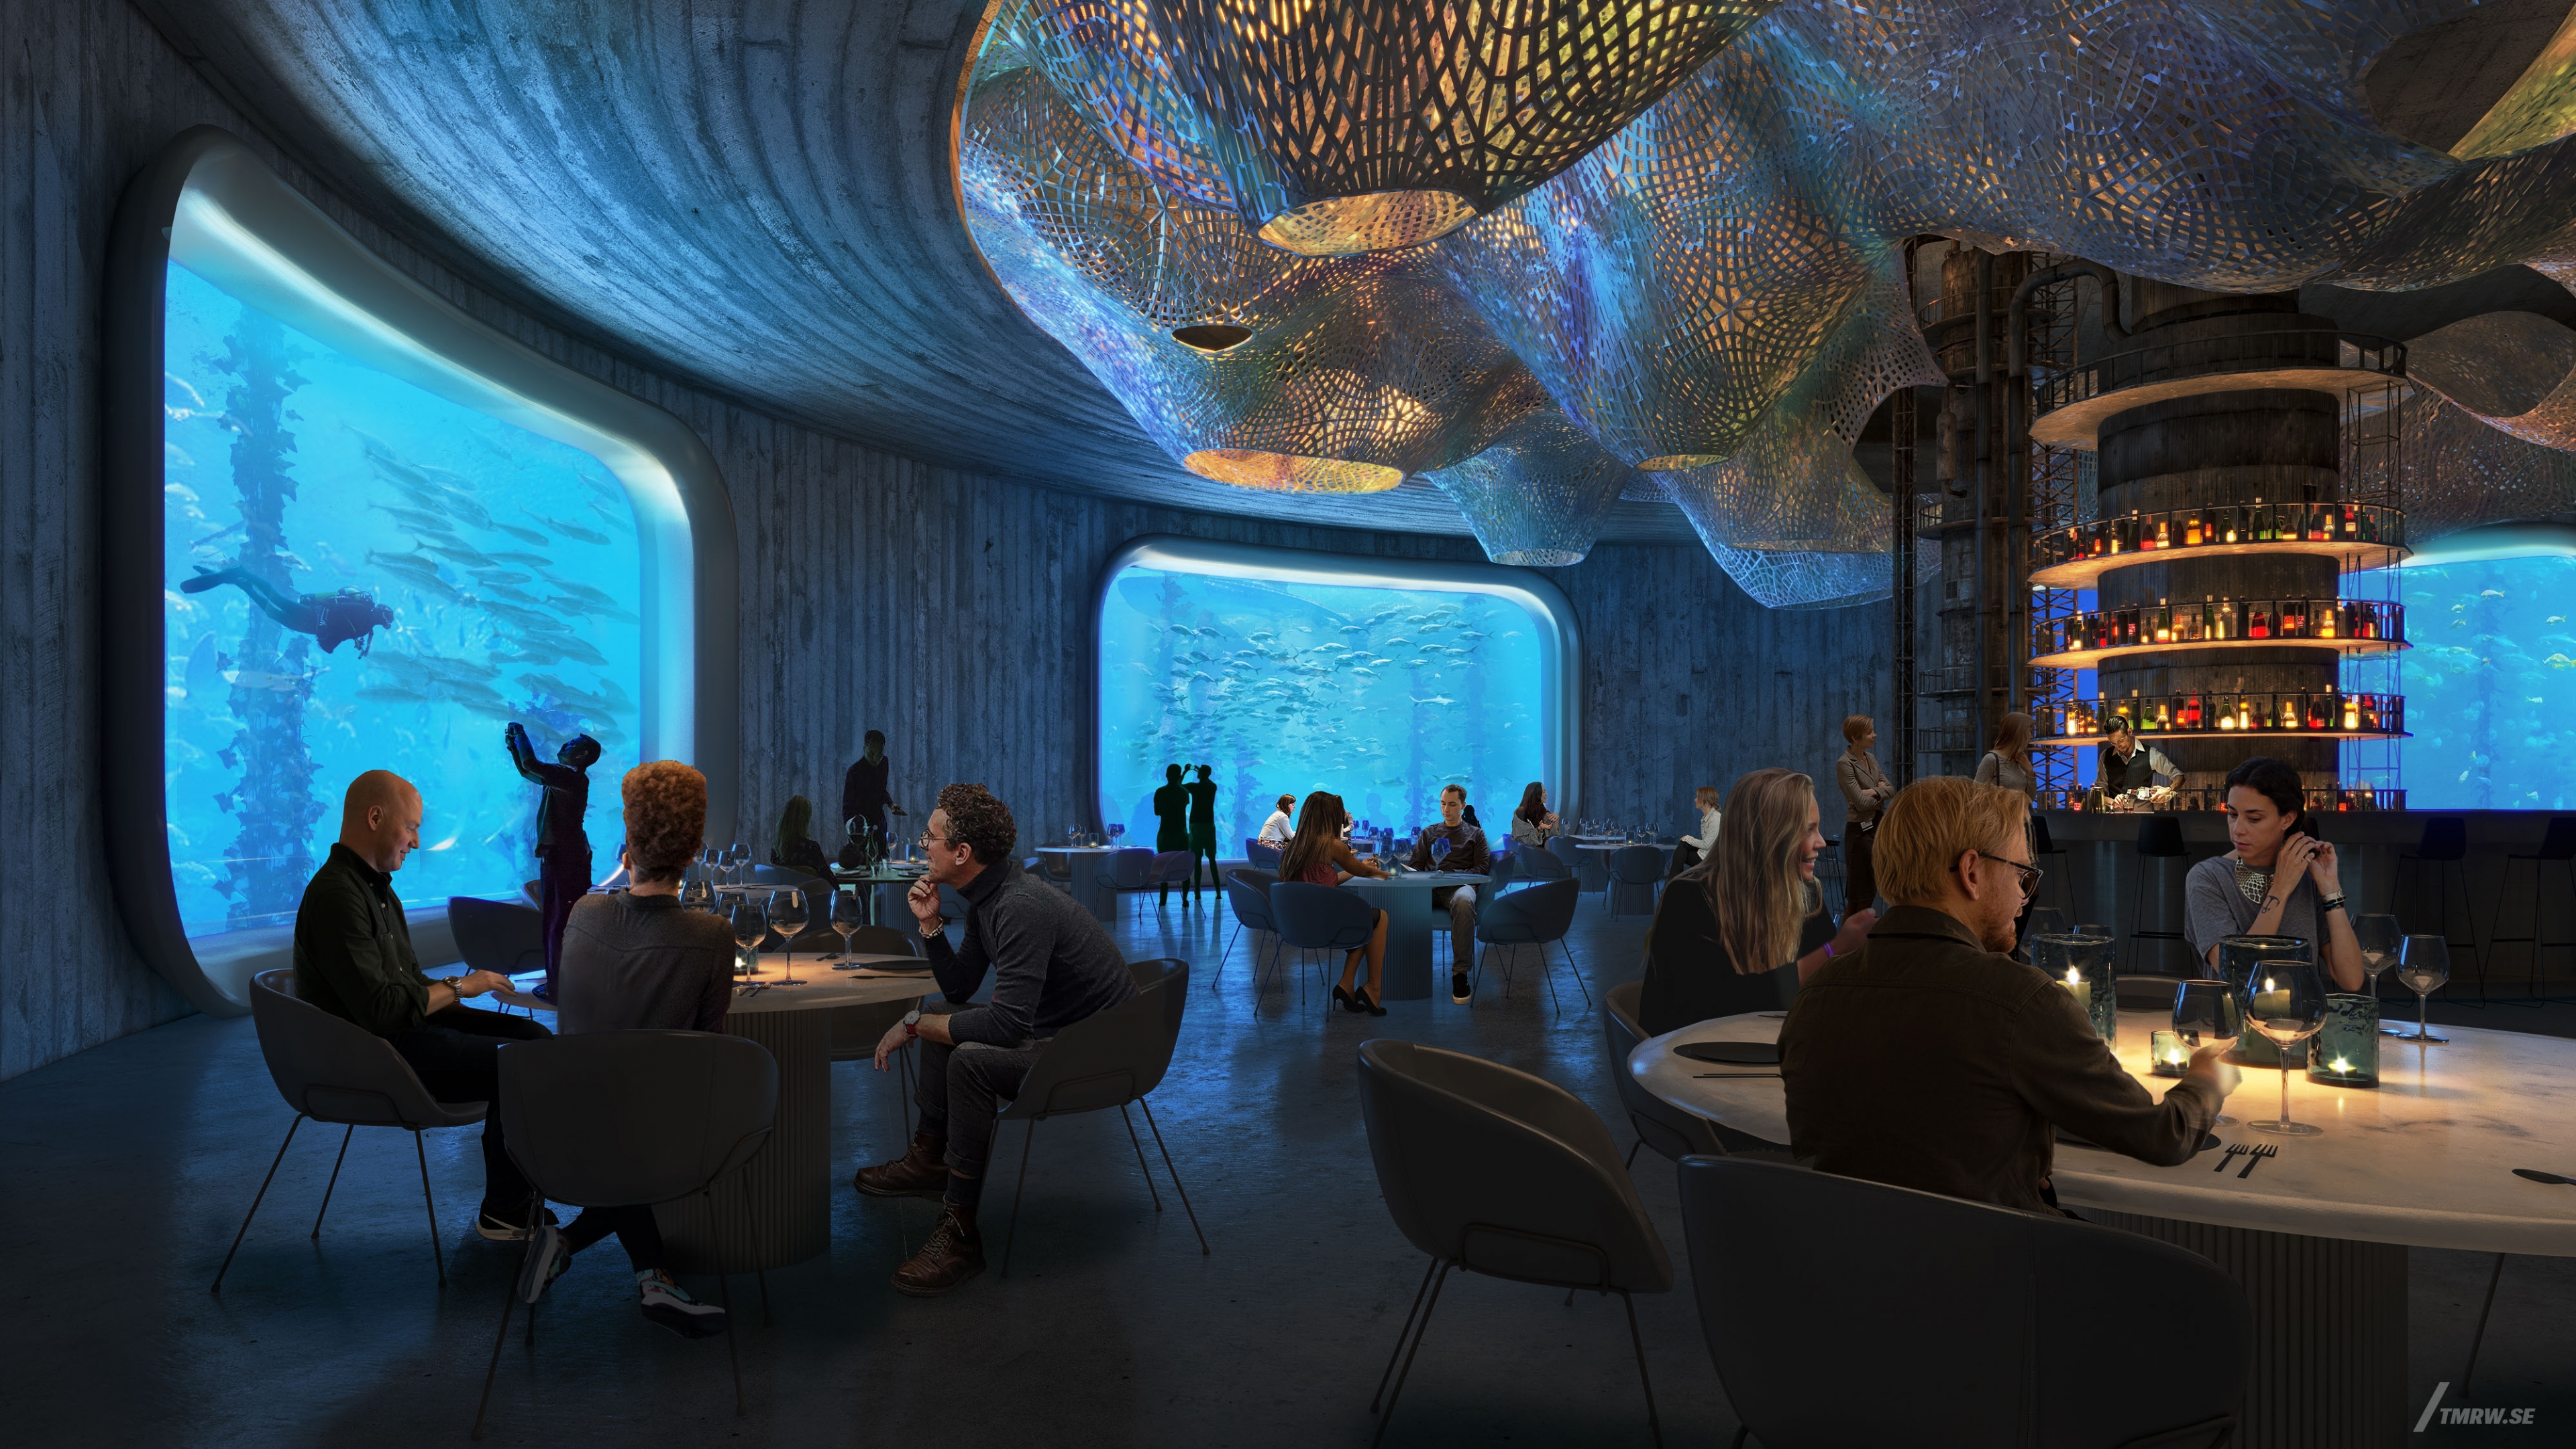 Architectural visualization of Hitch for HKS. An image of the interior of a underwater restaurant with people dining and talking at night from street view.